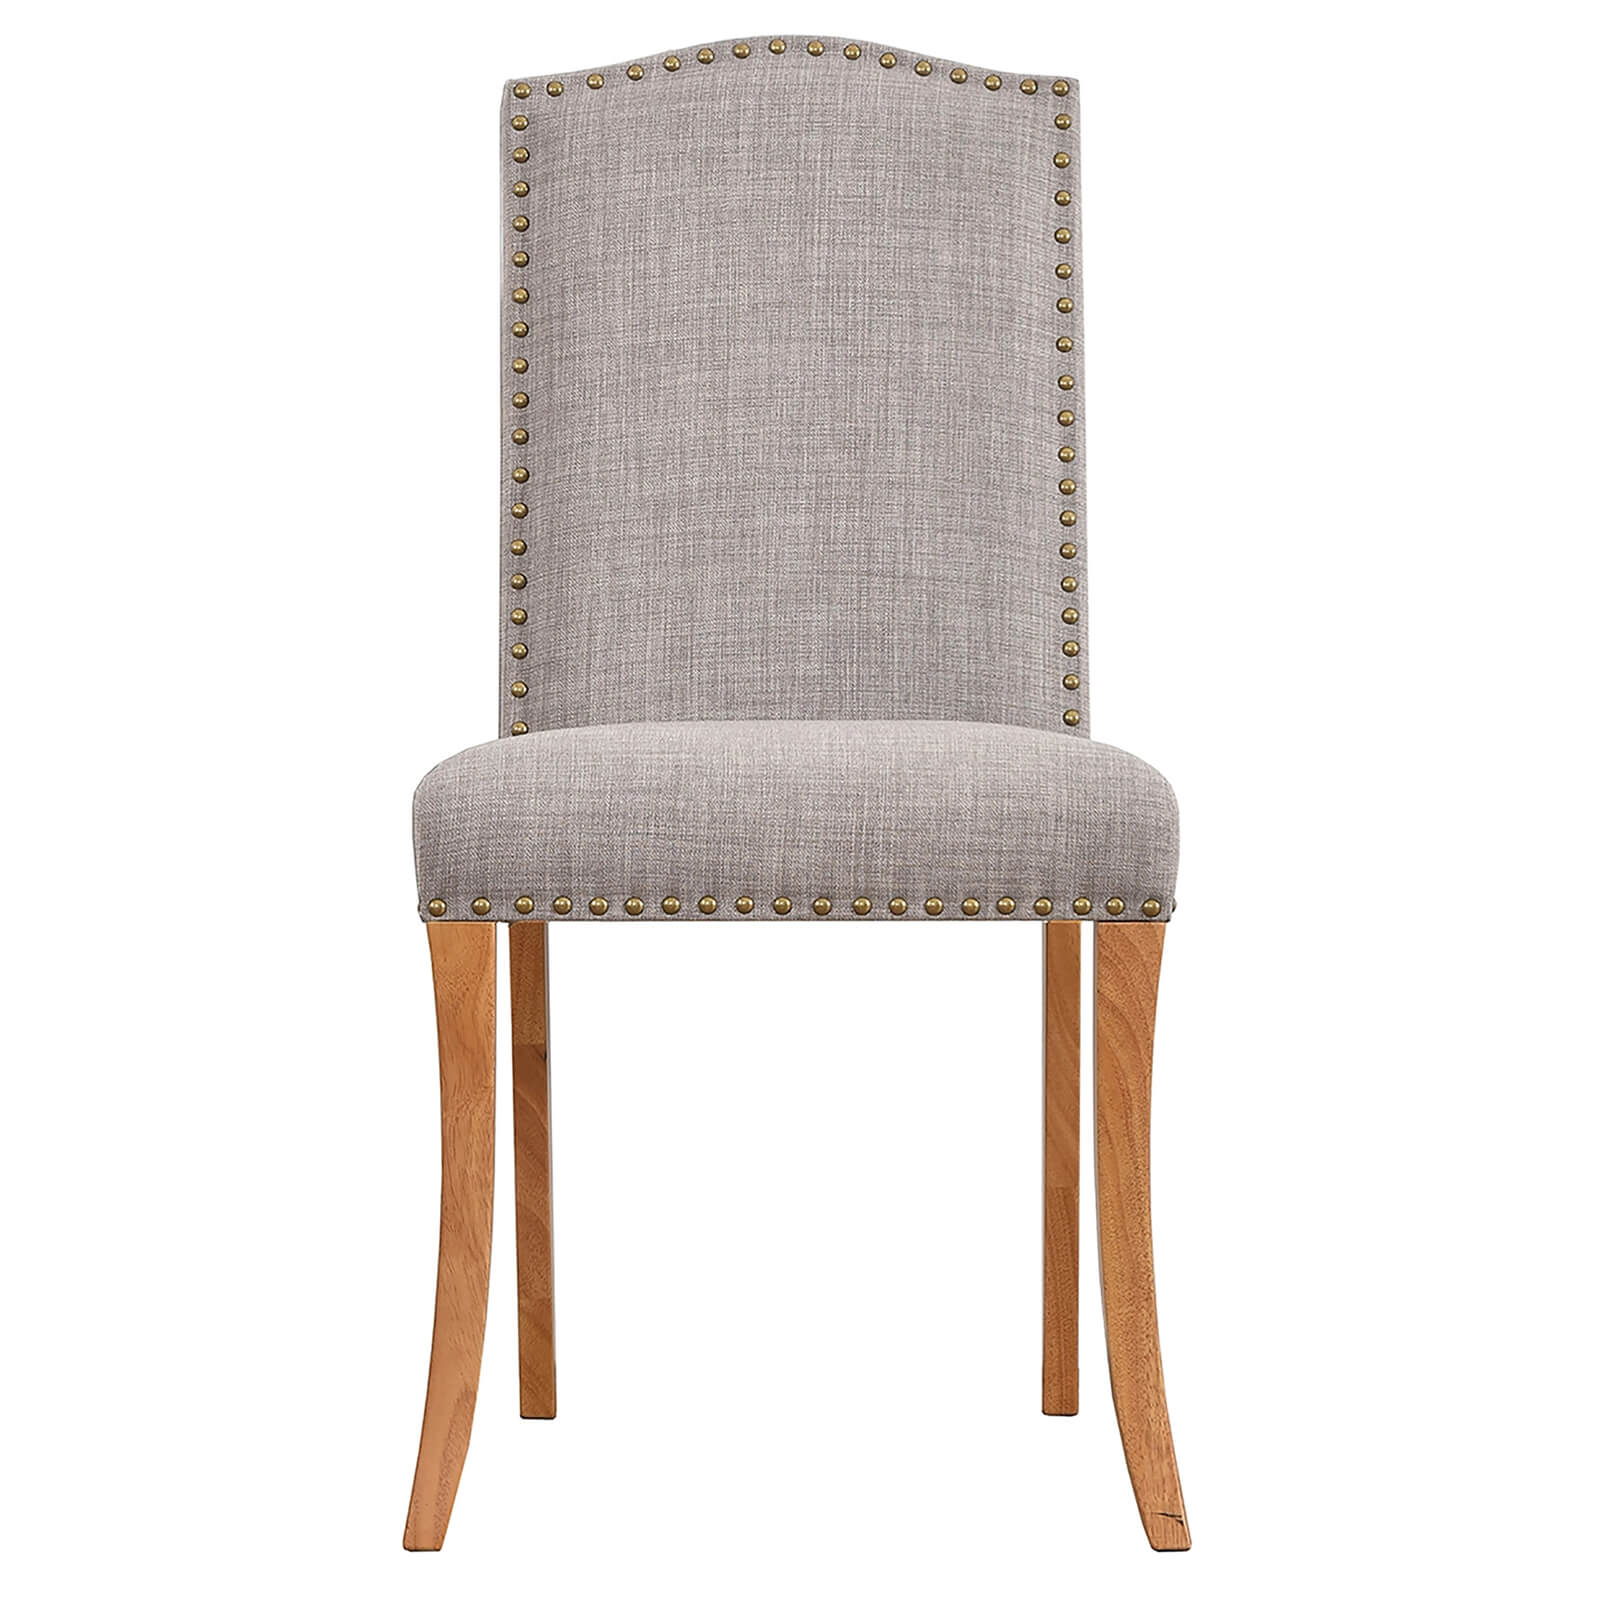 Evesham Dining Chair - Charcoal